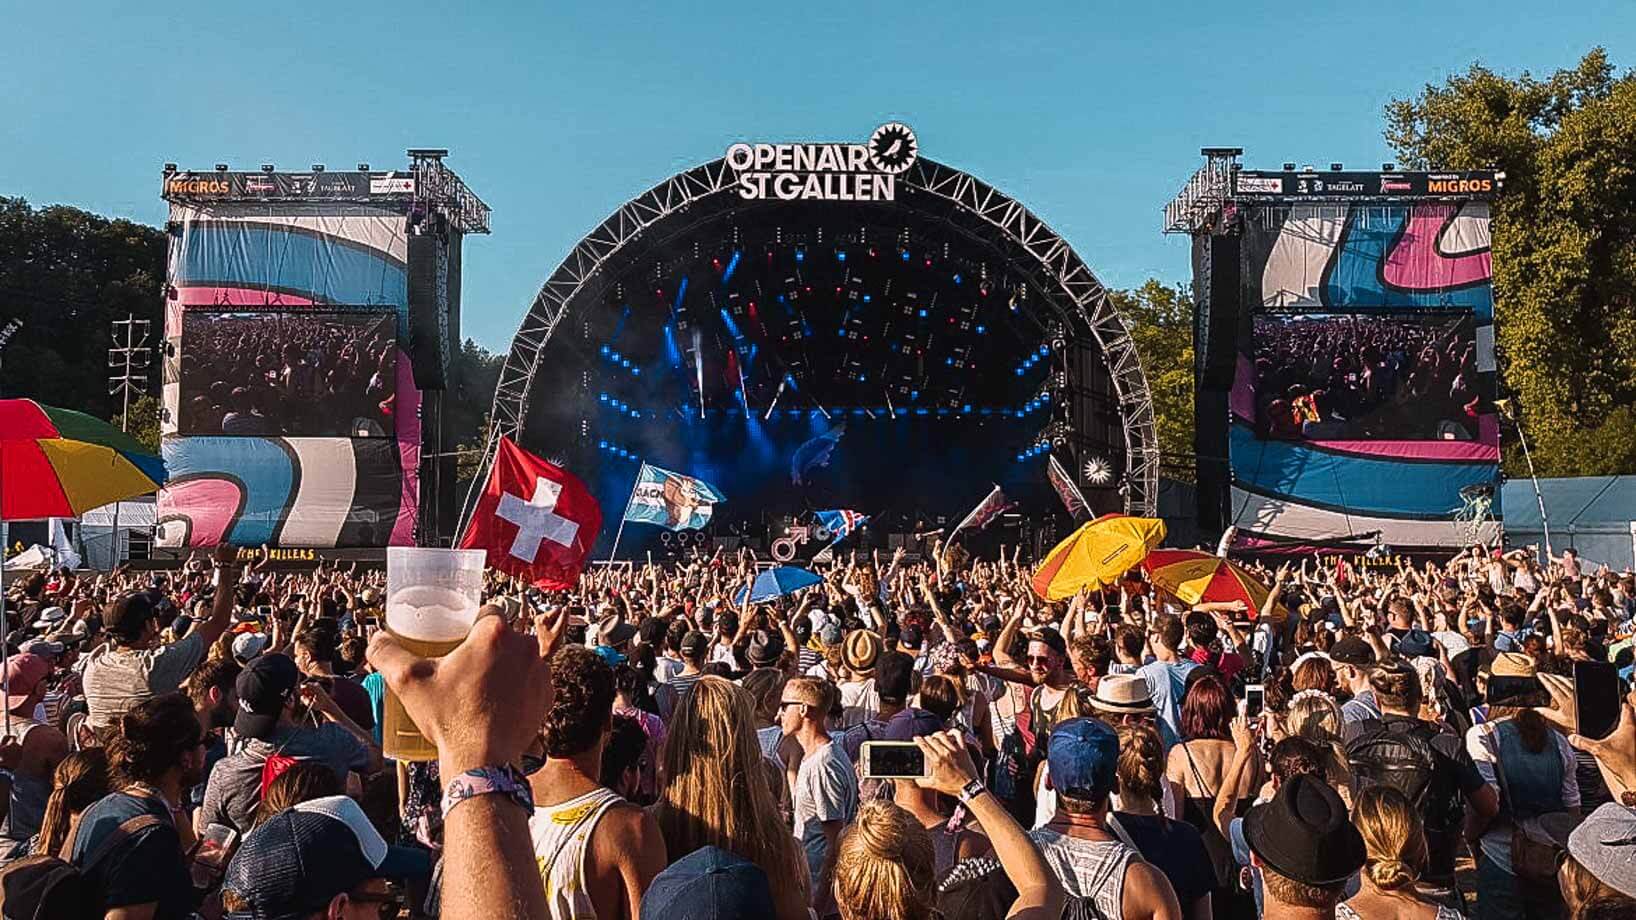 OpenAir St. Gallen Festival- Less Famous Music Festivals in Europe that You Should Check Out